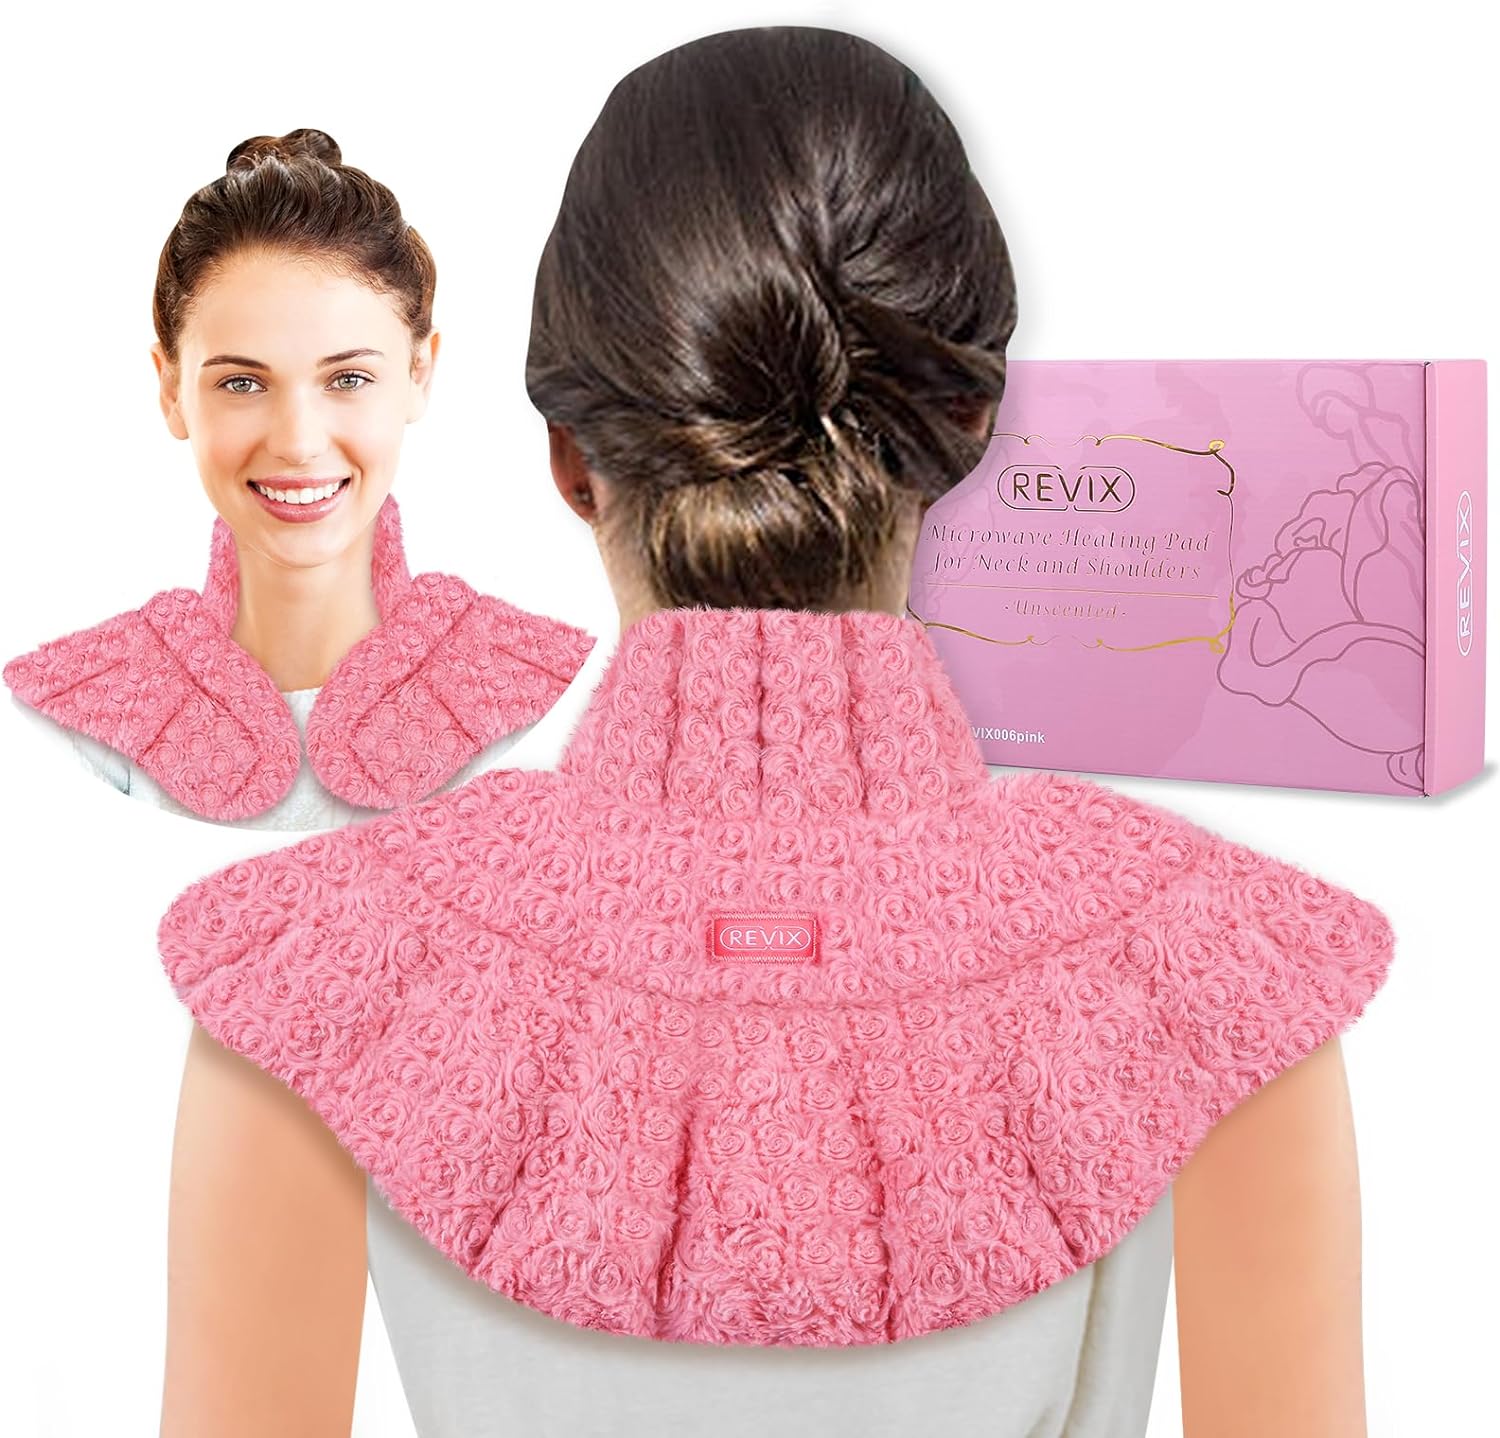 revix microwave heated neck and shoulder wrap